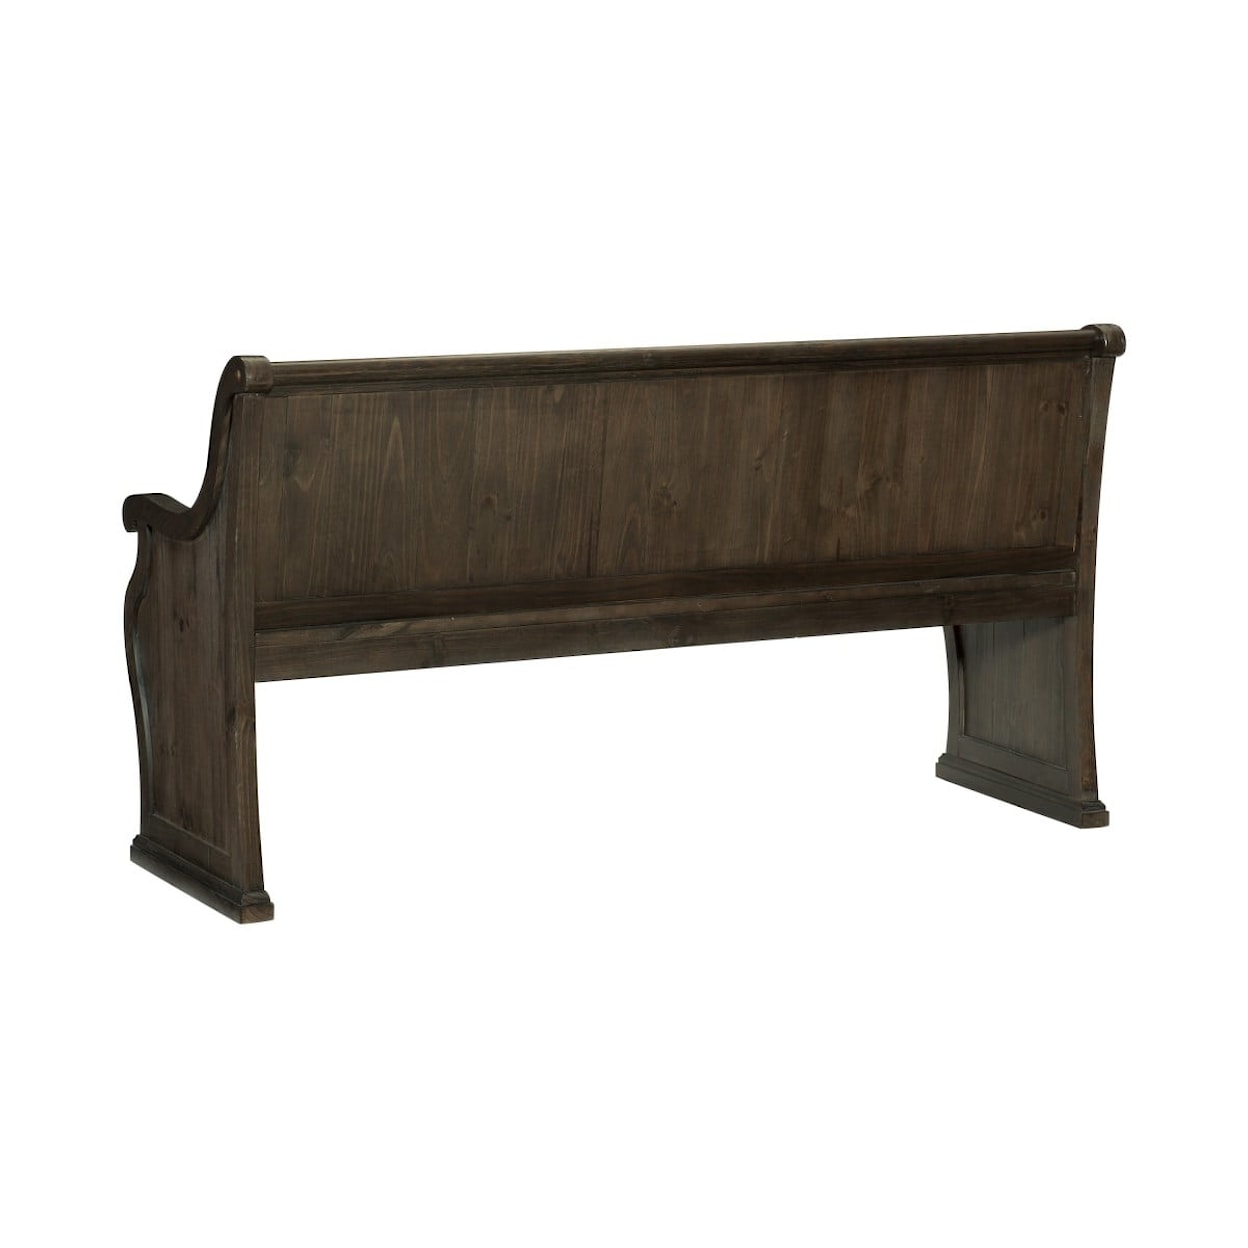 Homelegance Furniture Gloversville Dining Bench with Arms